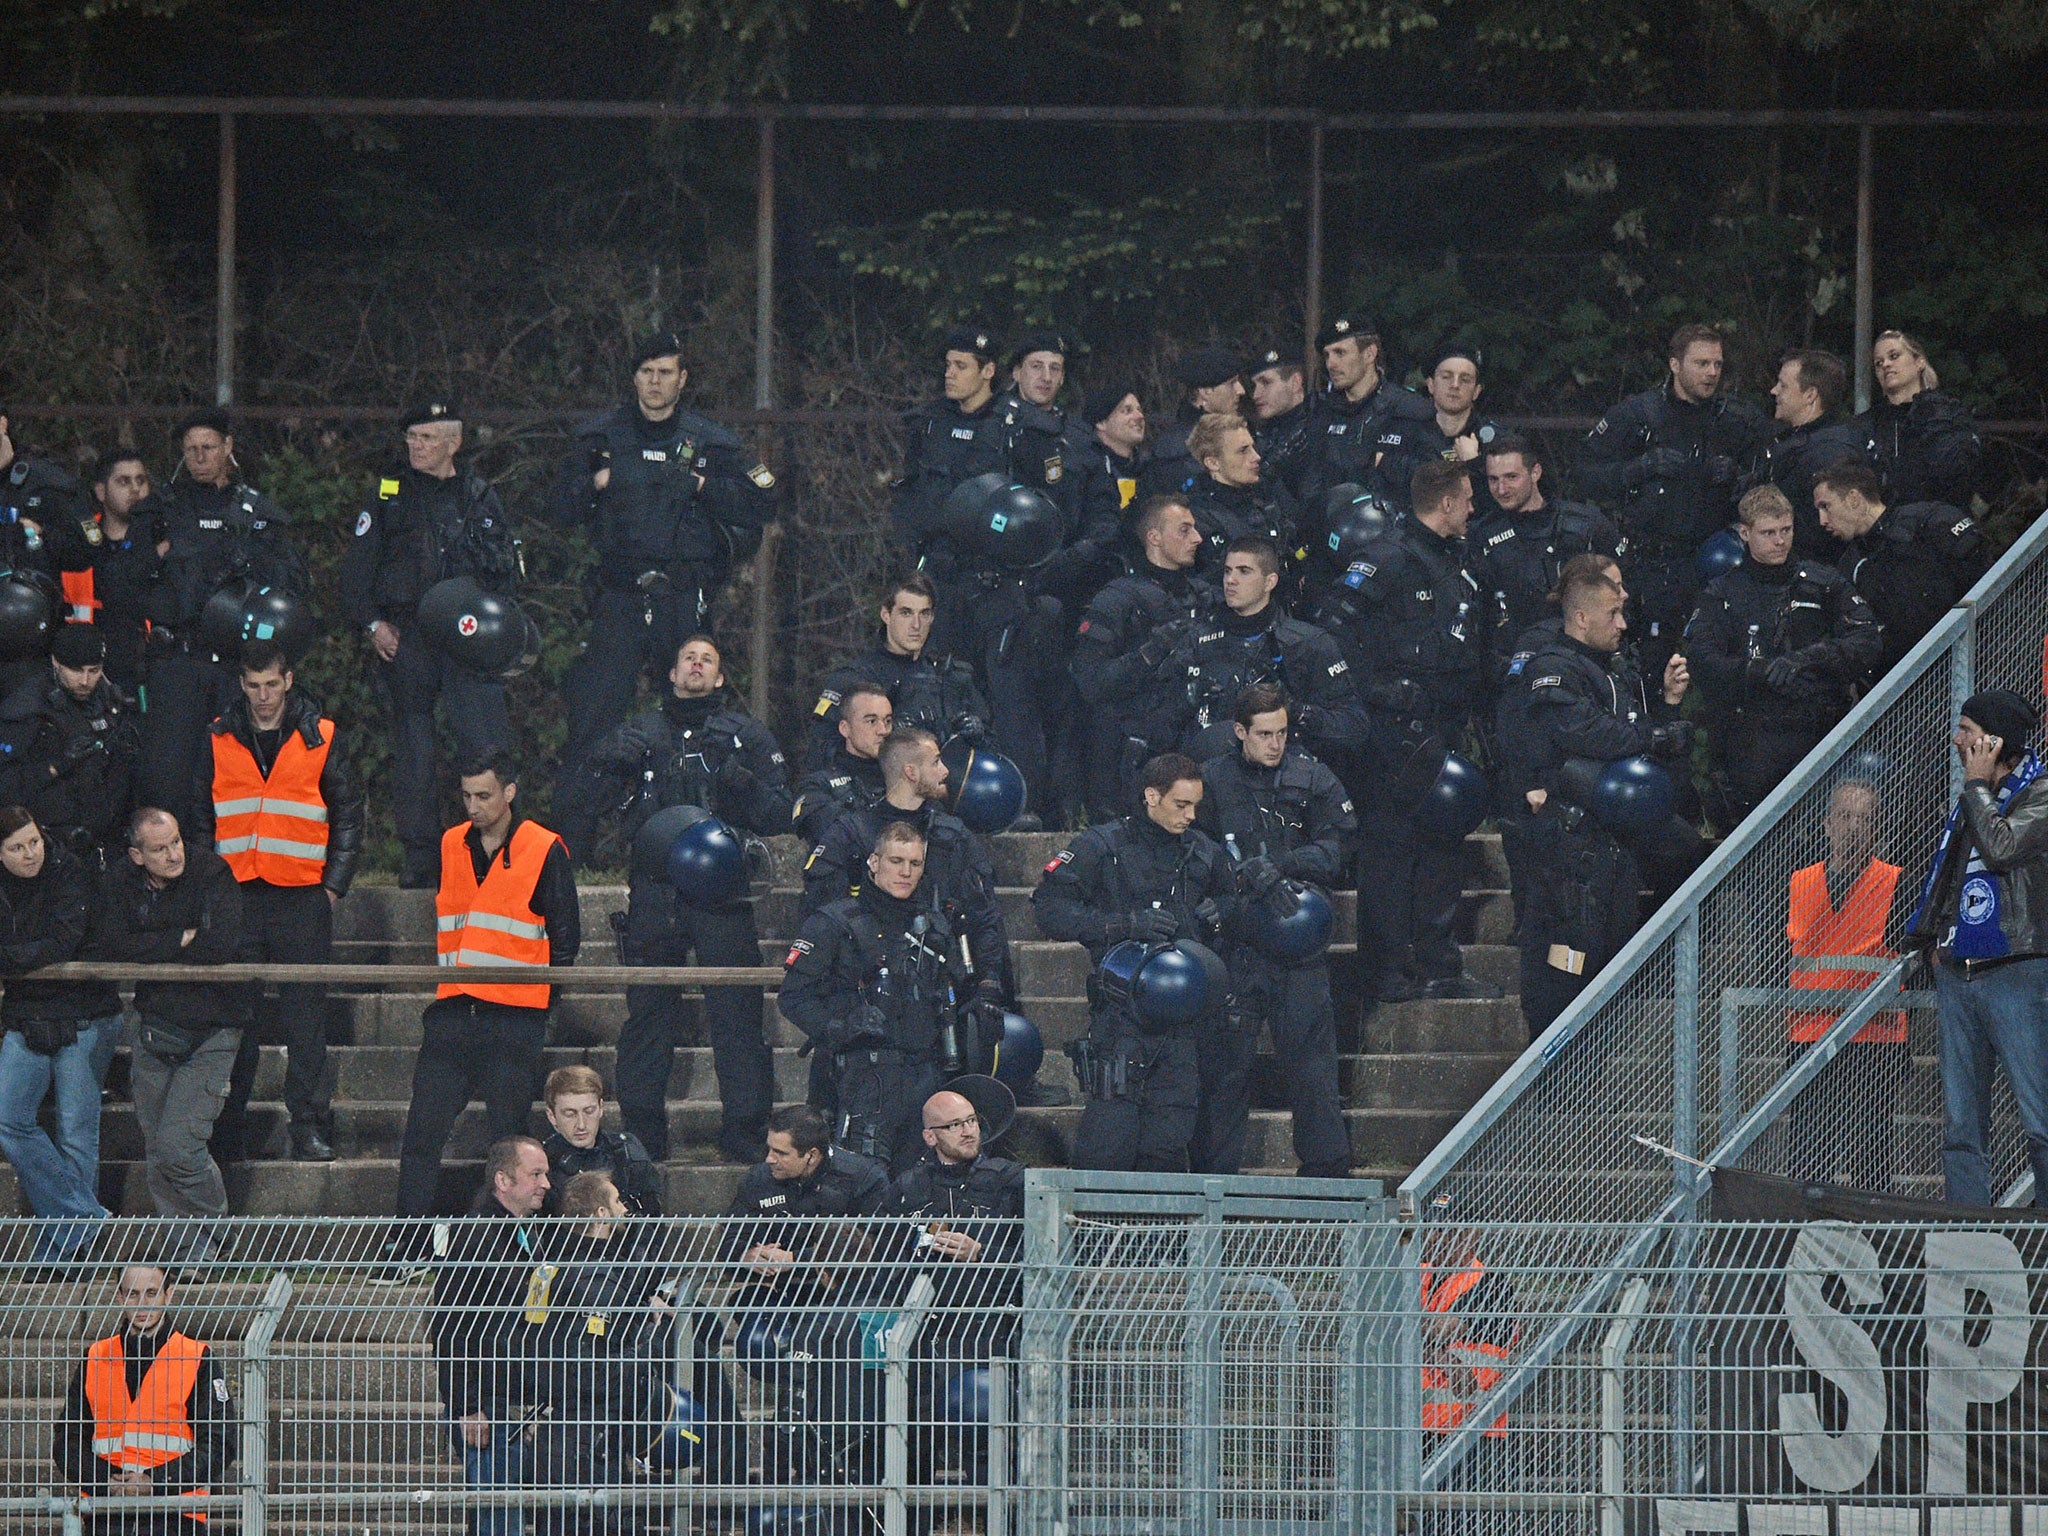 German police may be a thing of the past in the Bundesliga